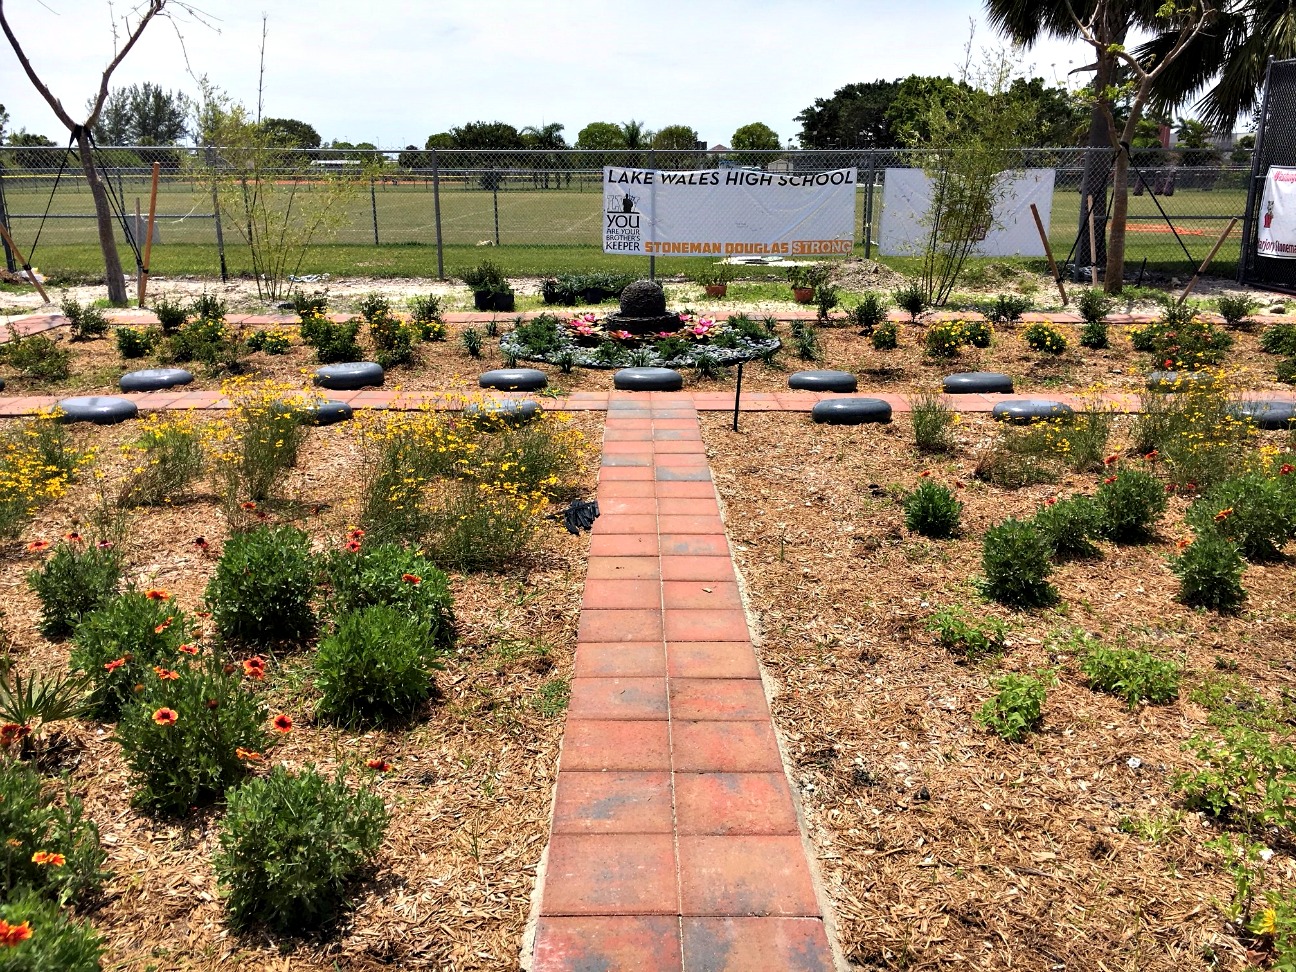 BrightView helps honor Parkland victims with reflective tranquility garden